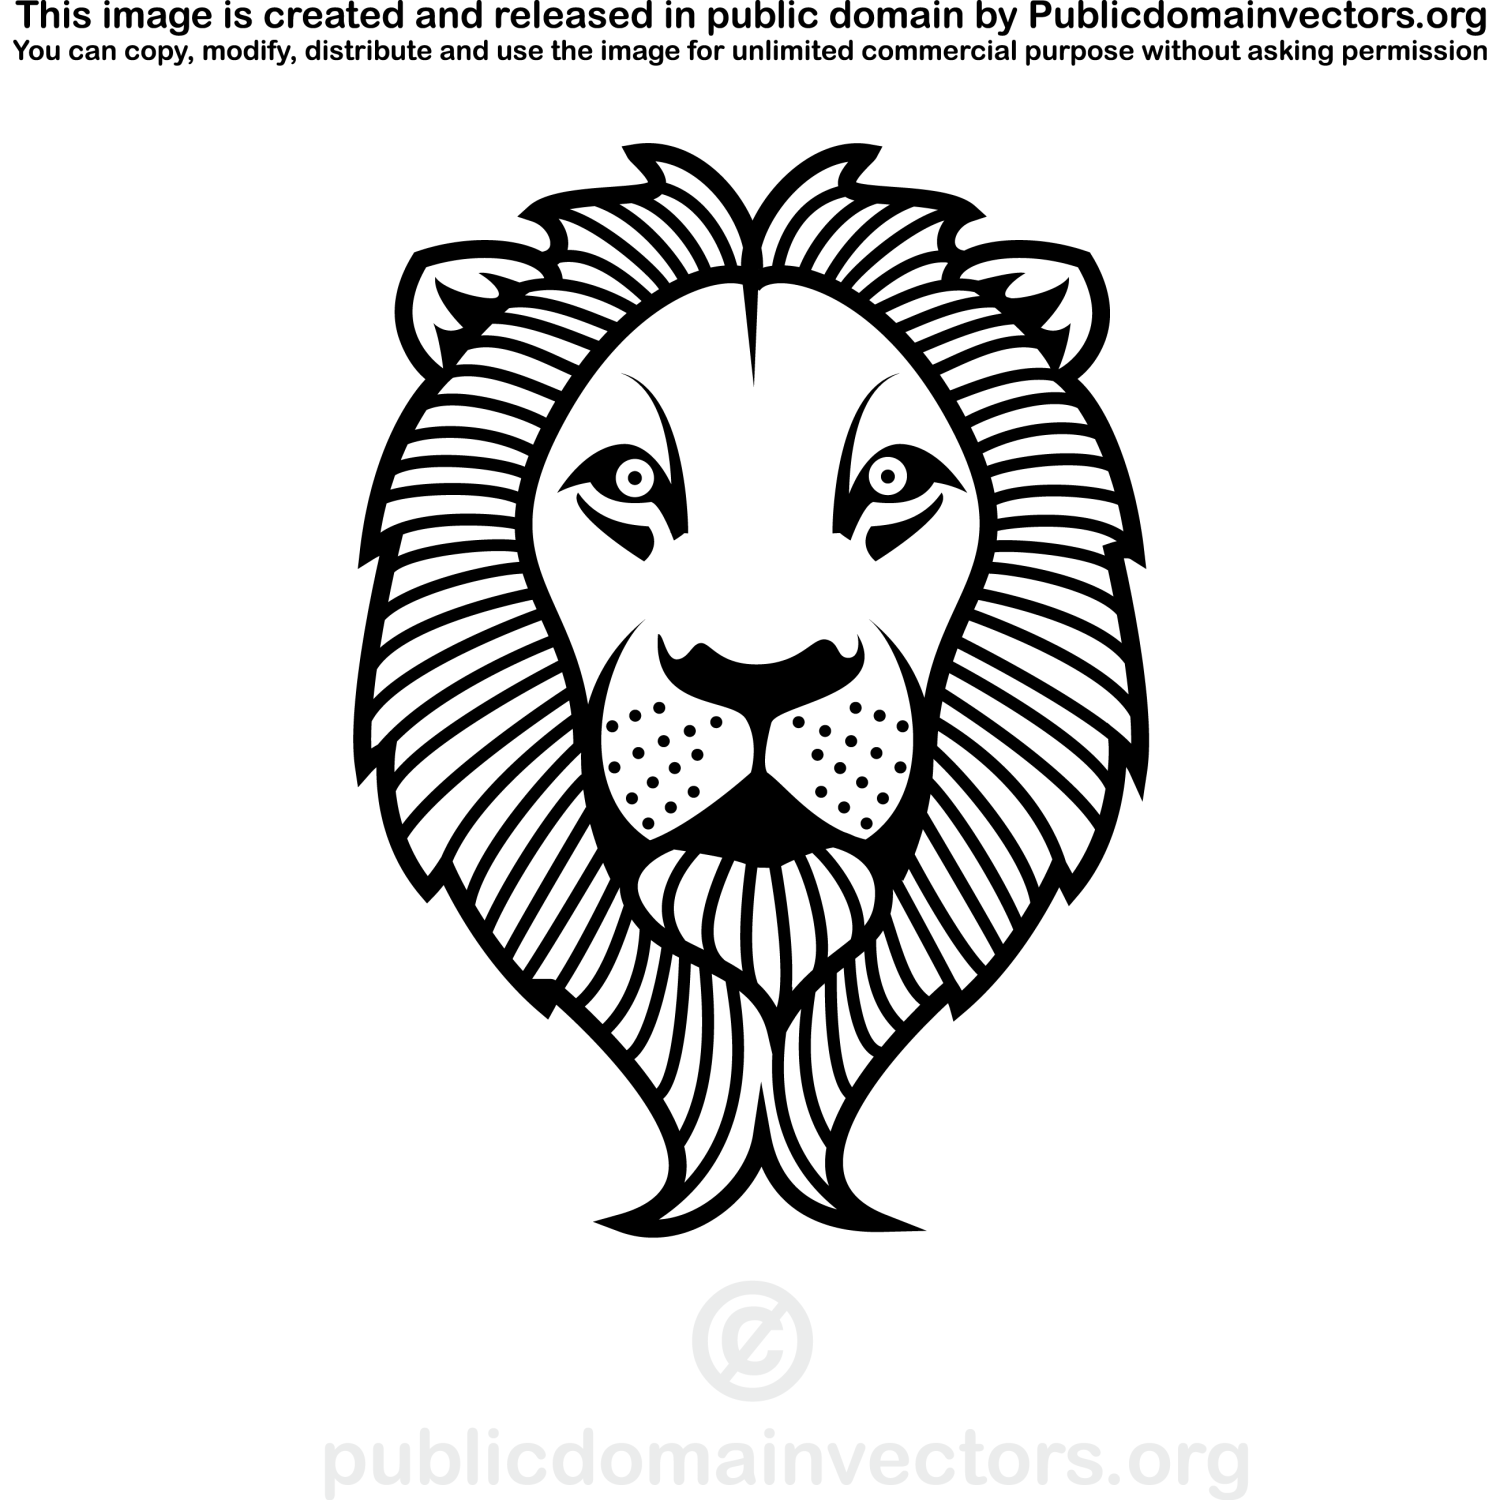 Head of the lion sideways black outline Royalty Free Vector